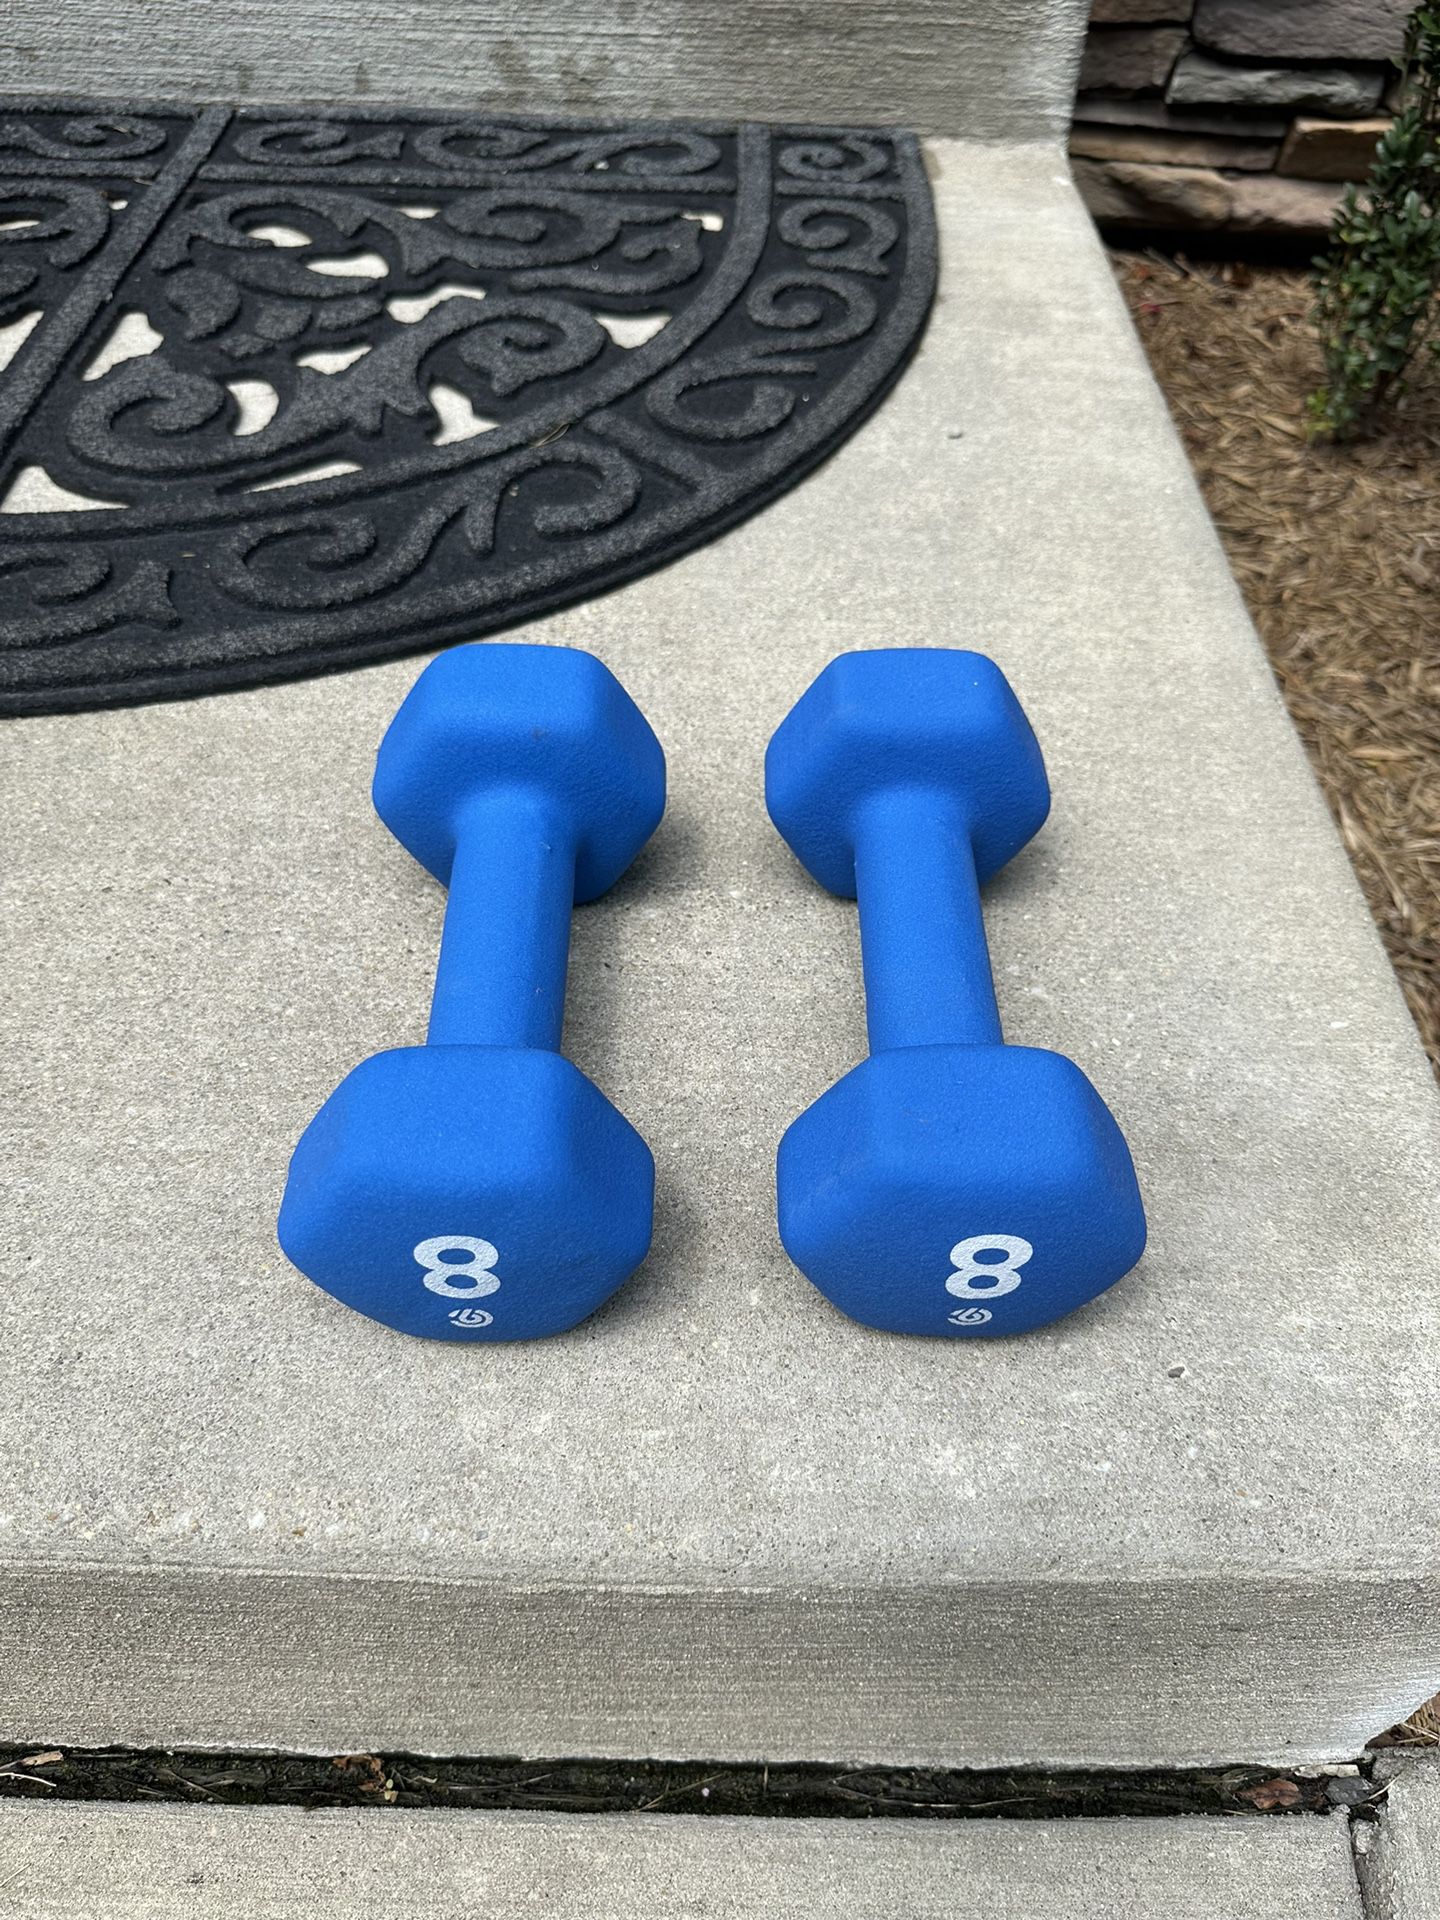 A pair of 8 lbs Dumbbells in great condition 